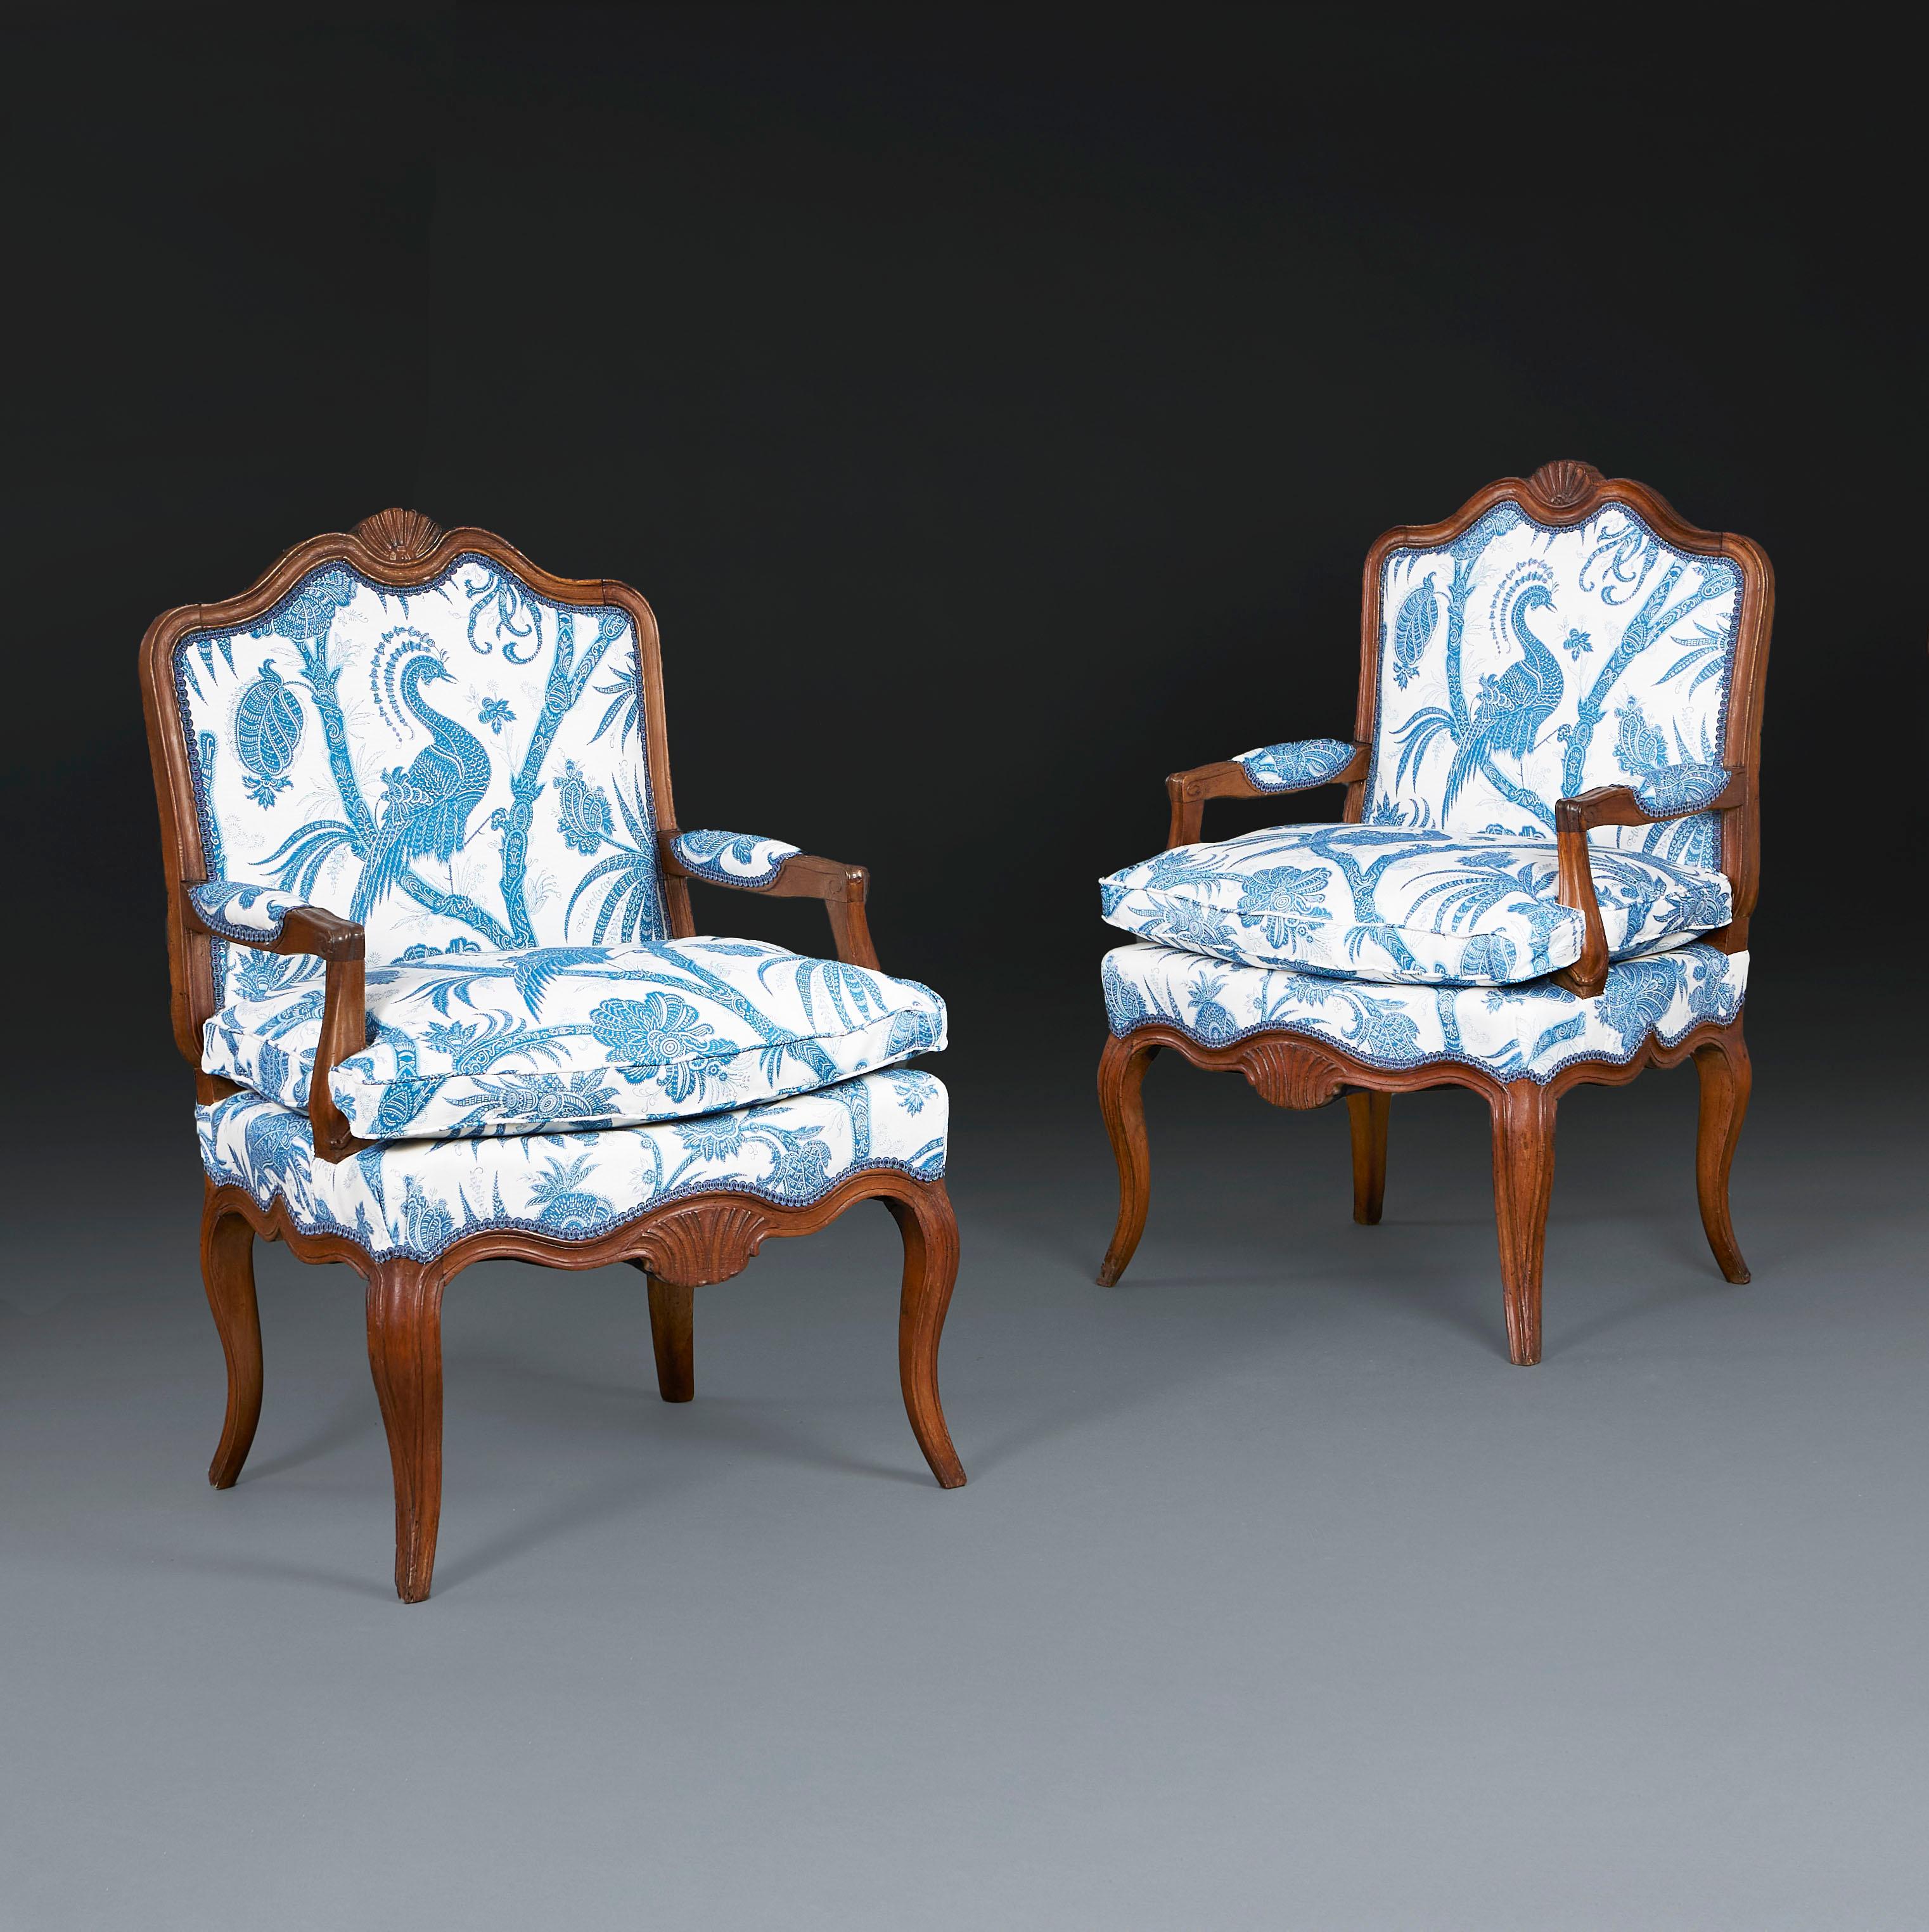 France, circa 1820

A pair of early nineteenth century walnut open armchairs with carved shells to the back seat rail, upholstered seats, all supported on four cabriole legs.

Upholstered in a blue and white Bennison fabric.

Height 98.50cm
Width